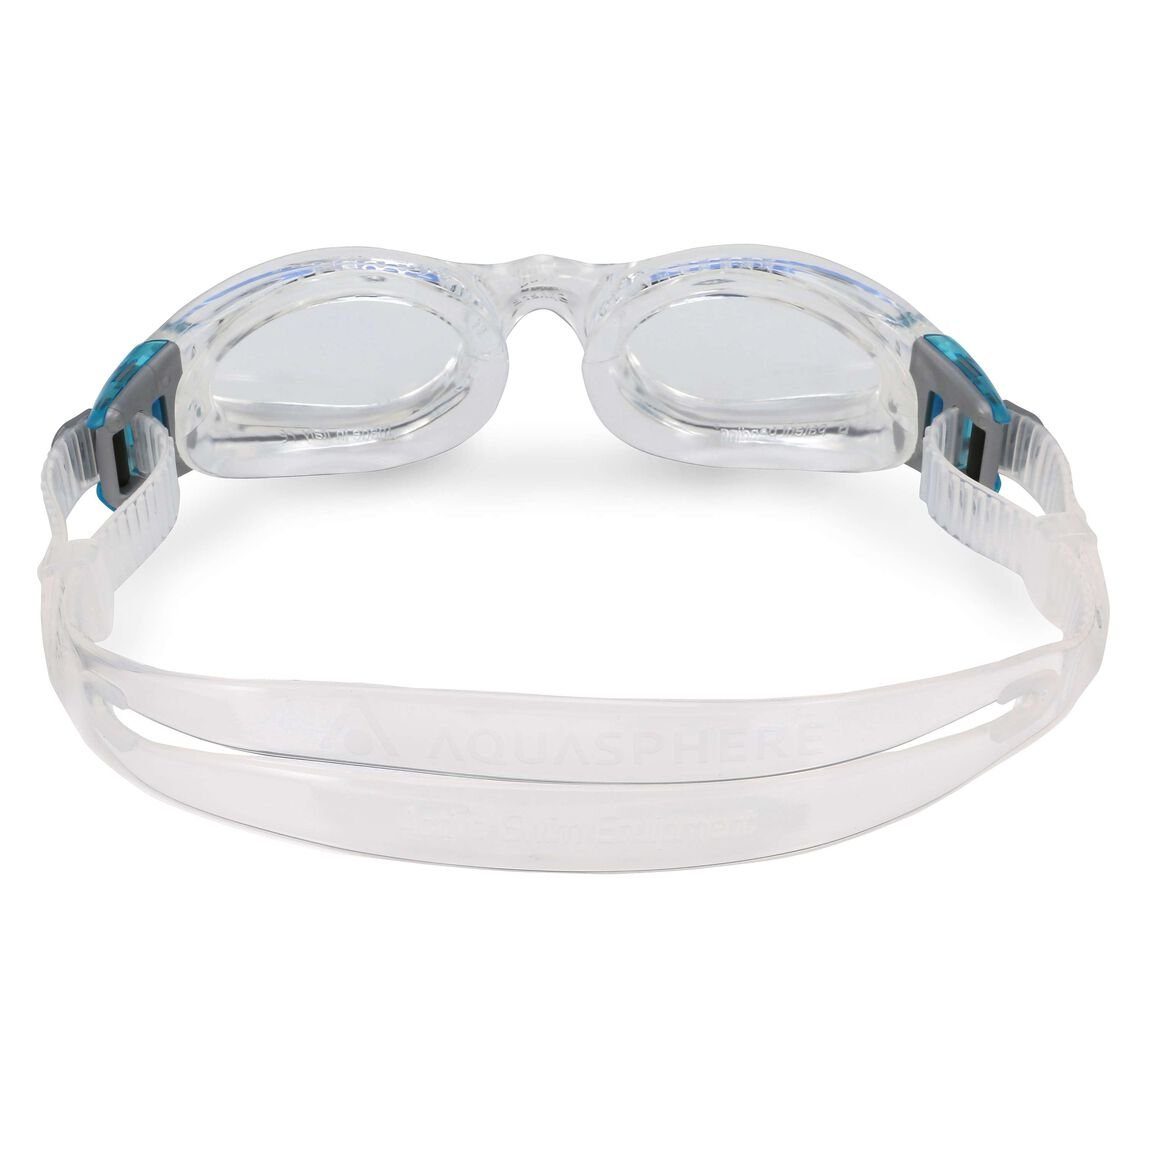 petrol LC Schwimmbrille TBL Aquasphere Kaiman small clear